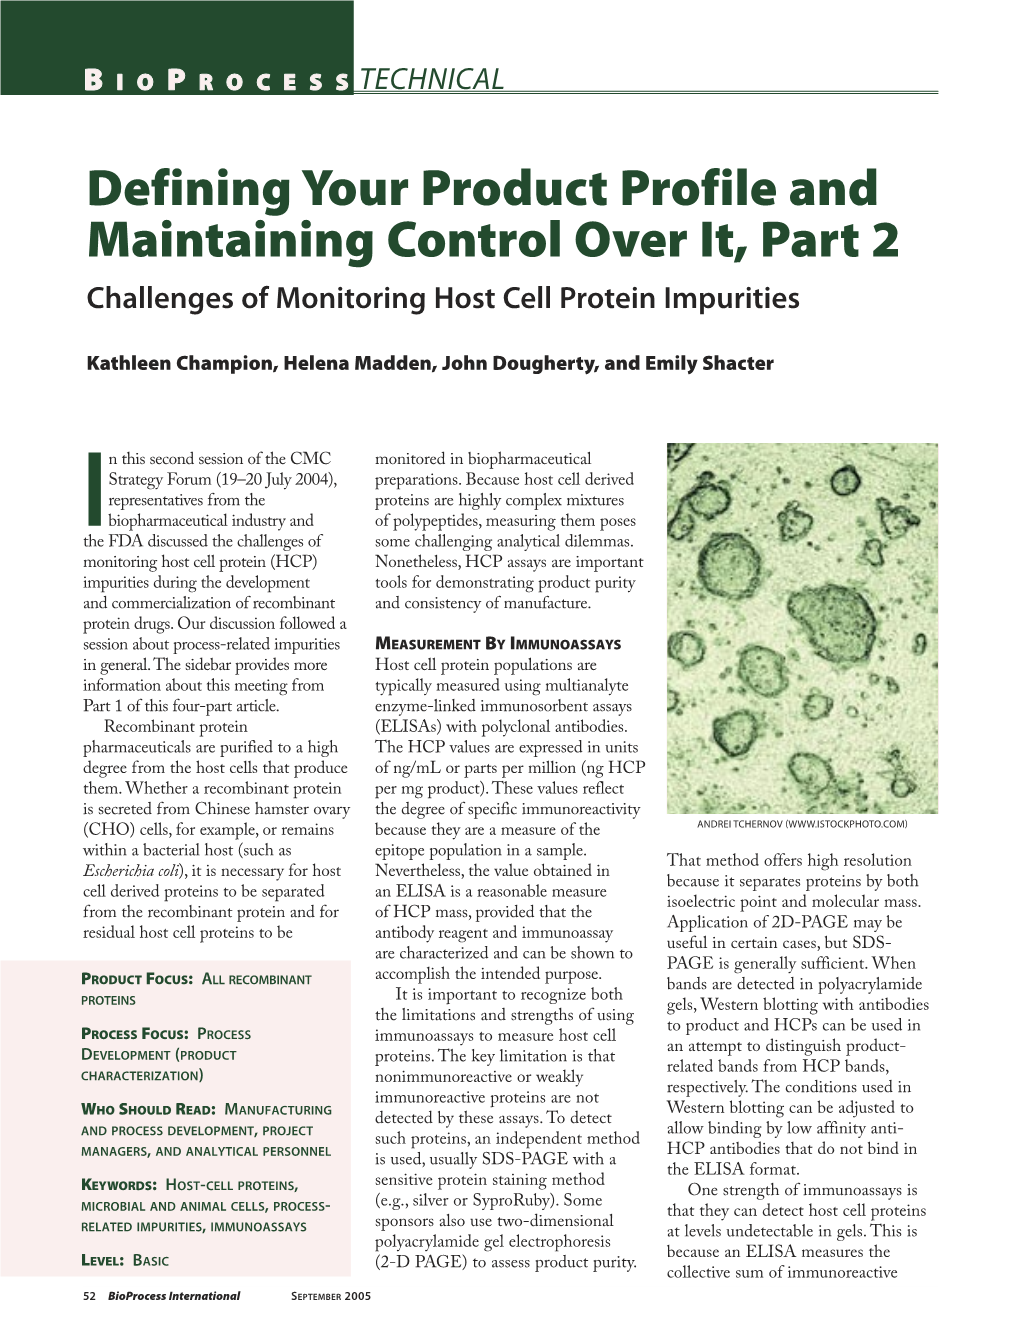 Defining Your Product Profile and Maintaining Control Over It, Part 2 Challenges of Monitoring Host Cell Protein Impurities